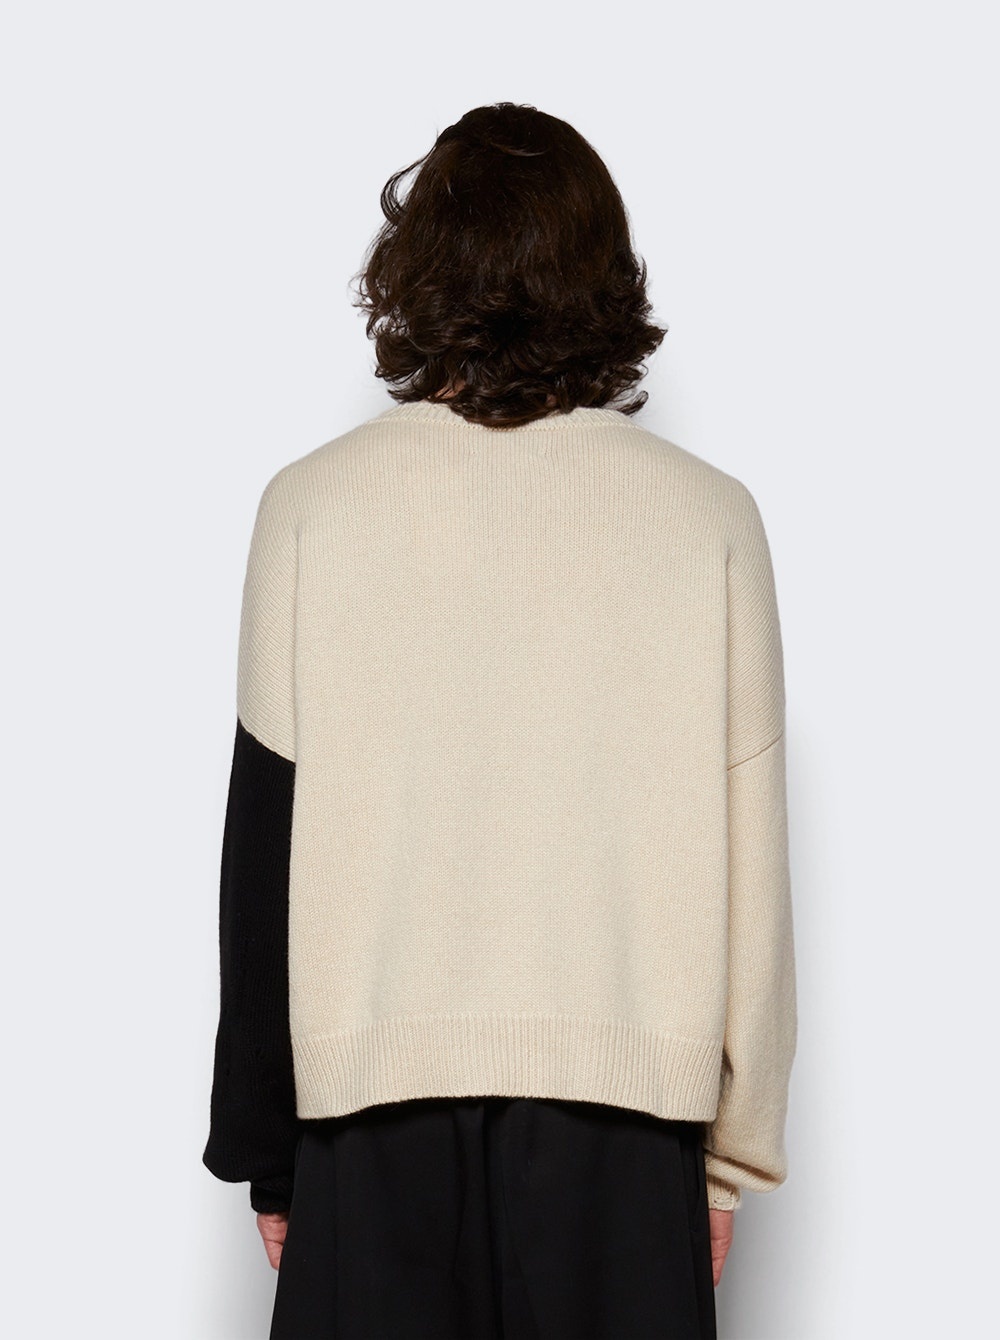 Decay Sweater Ivory And Black - 5